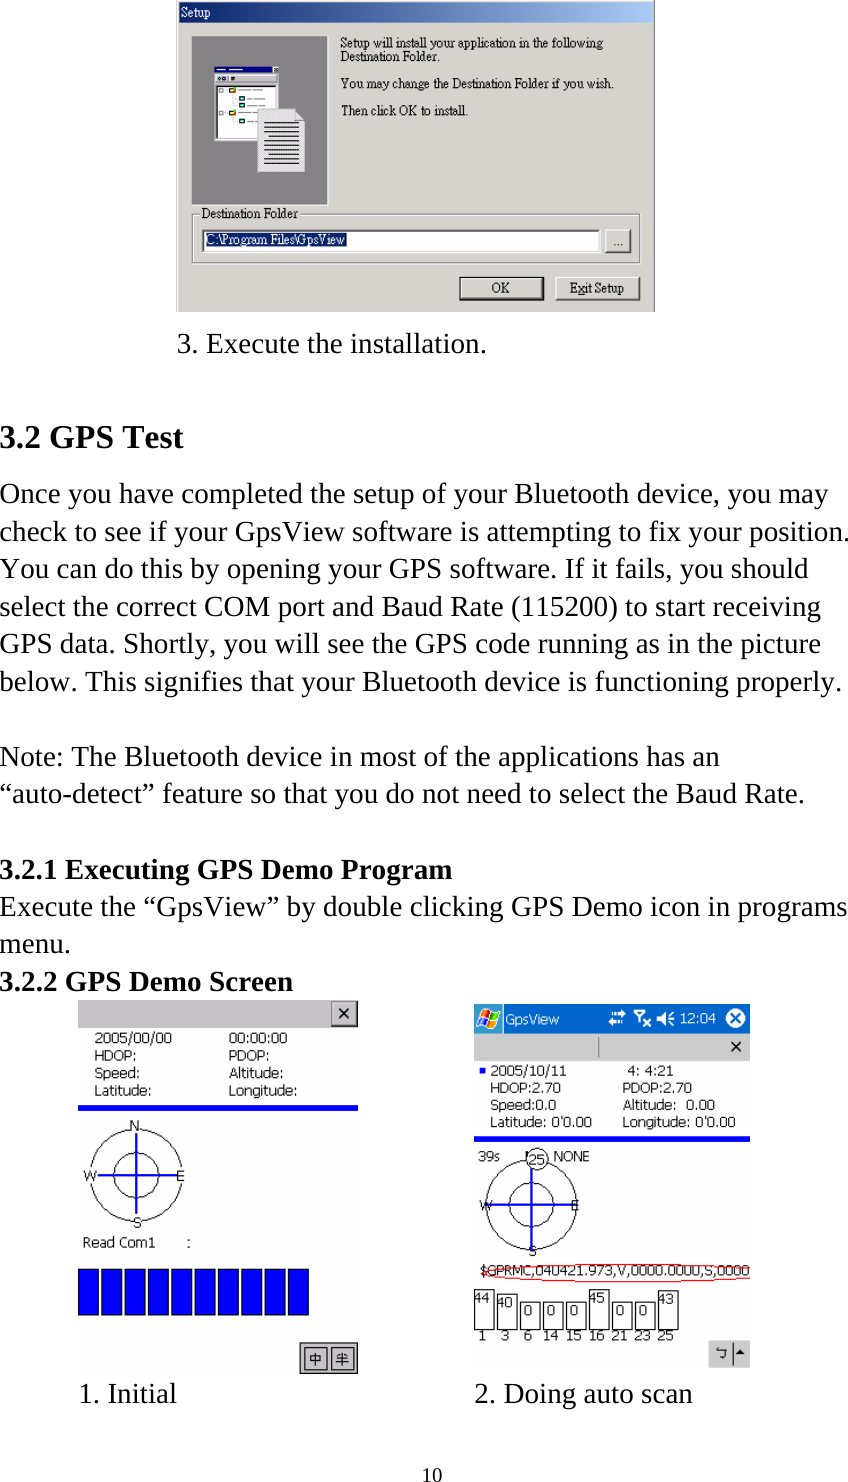  10     3. Execute the installation.    3.2 GPS Test Once you have completed the setup of your Bluetooth device, you may check to see if your GpsView software is attempting to fix your position. You can do this by opening your GPS software. If it fails, you should select the correct COM port and Baud Rate (115200) to start receiving GPS data. Shortly, you will see the GPS code running as in the picture below. This signifies that your Bluetooth device is functioning properly.  Note: The Bluetooth device in most of the applications has an “auto-detect” feature so that you do not need to select the Baud Rate.  3.2.1 Executing GPS Demo Program Execute the “GpsView” by double clicking GPS Demo icon in programs menu. 3.2.2 GPS Demo Screen        1. Initial    2. Doing auto scan   